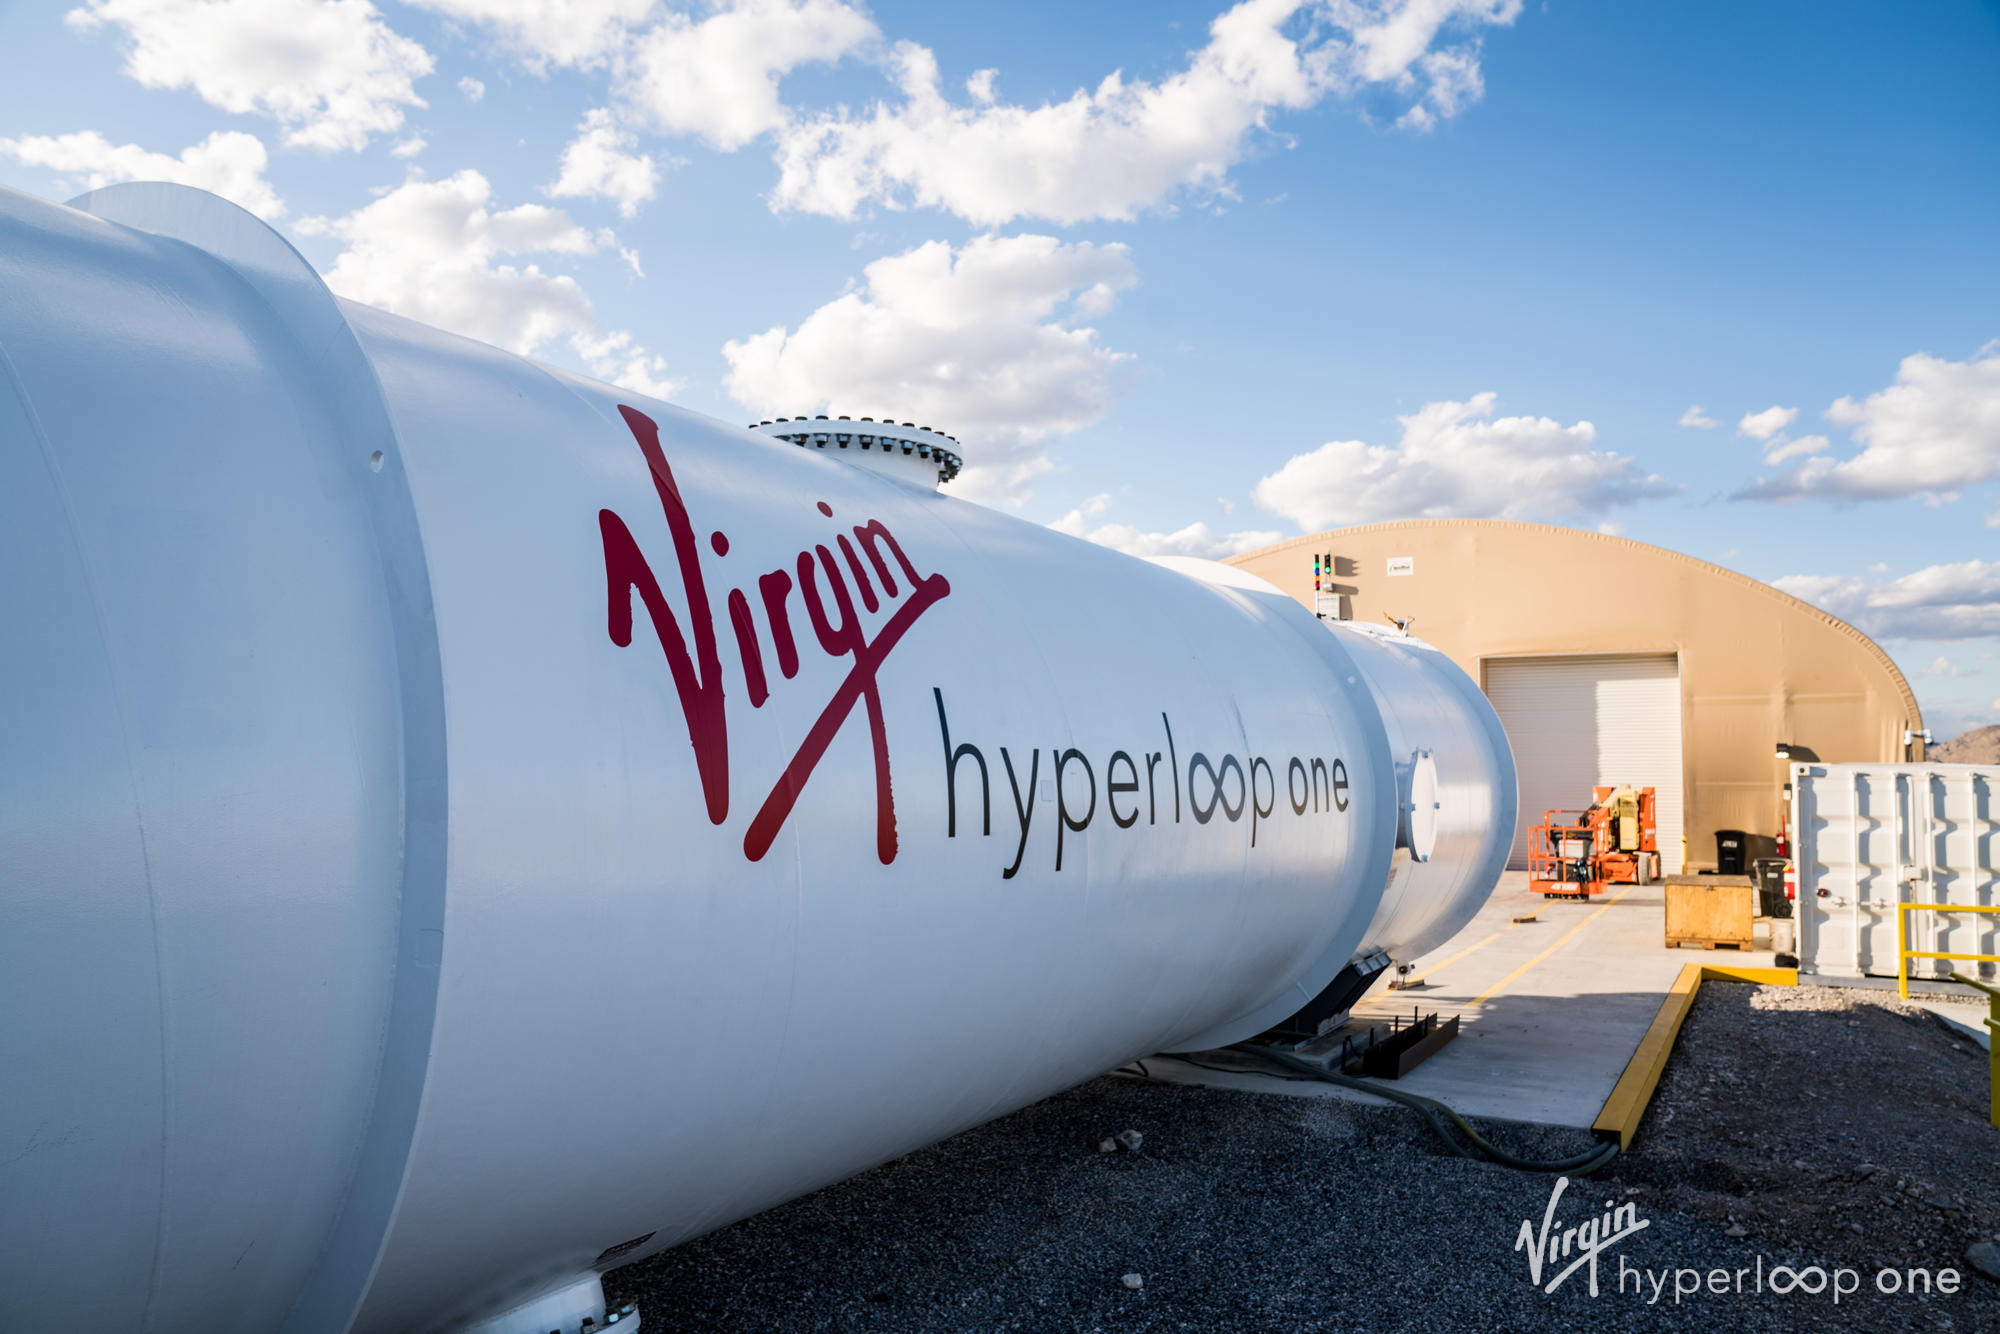 Virgin Hyperloop One has a new CEO and board chairman